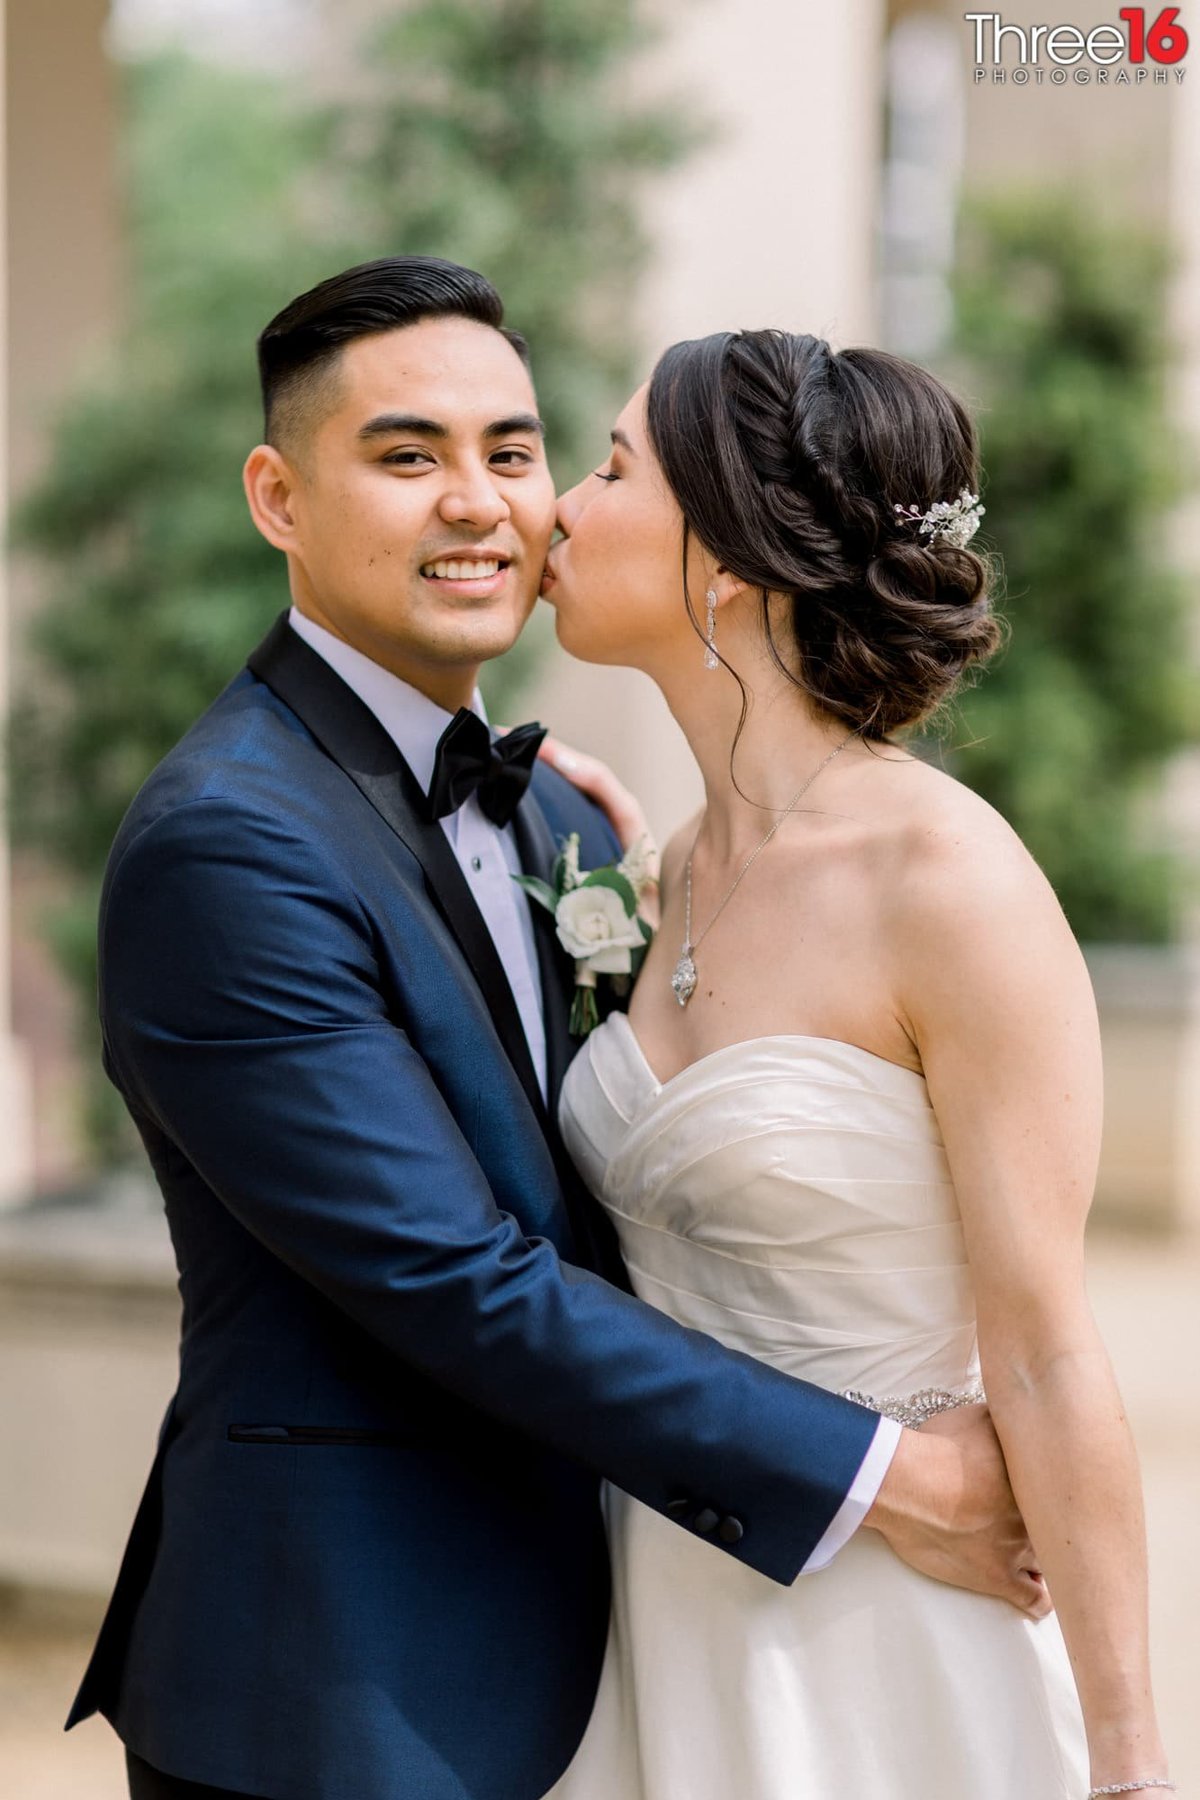 Bride gives the Groom a peck on the cheek during their wedding photos session